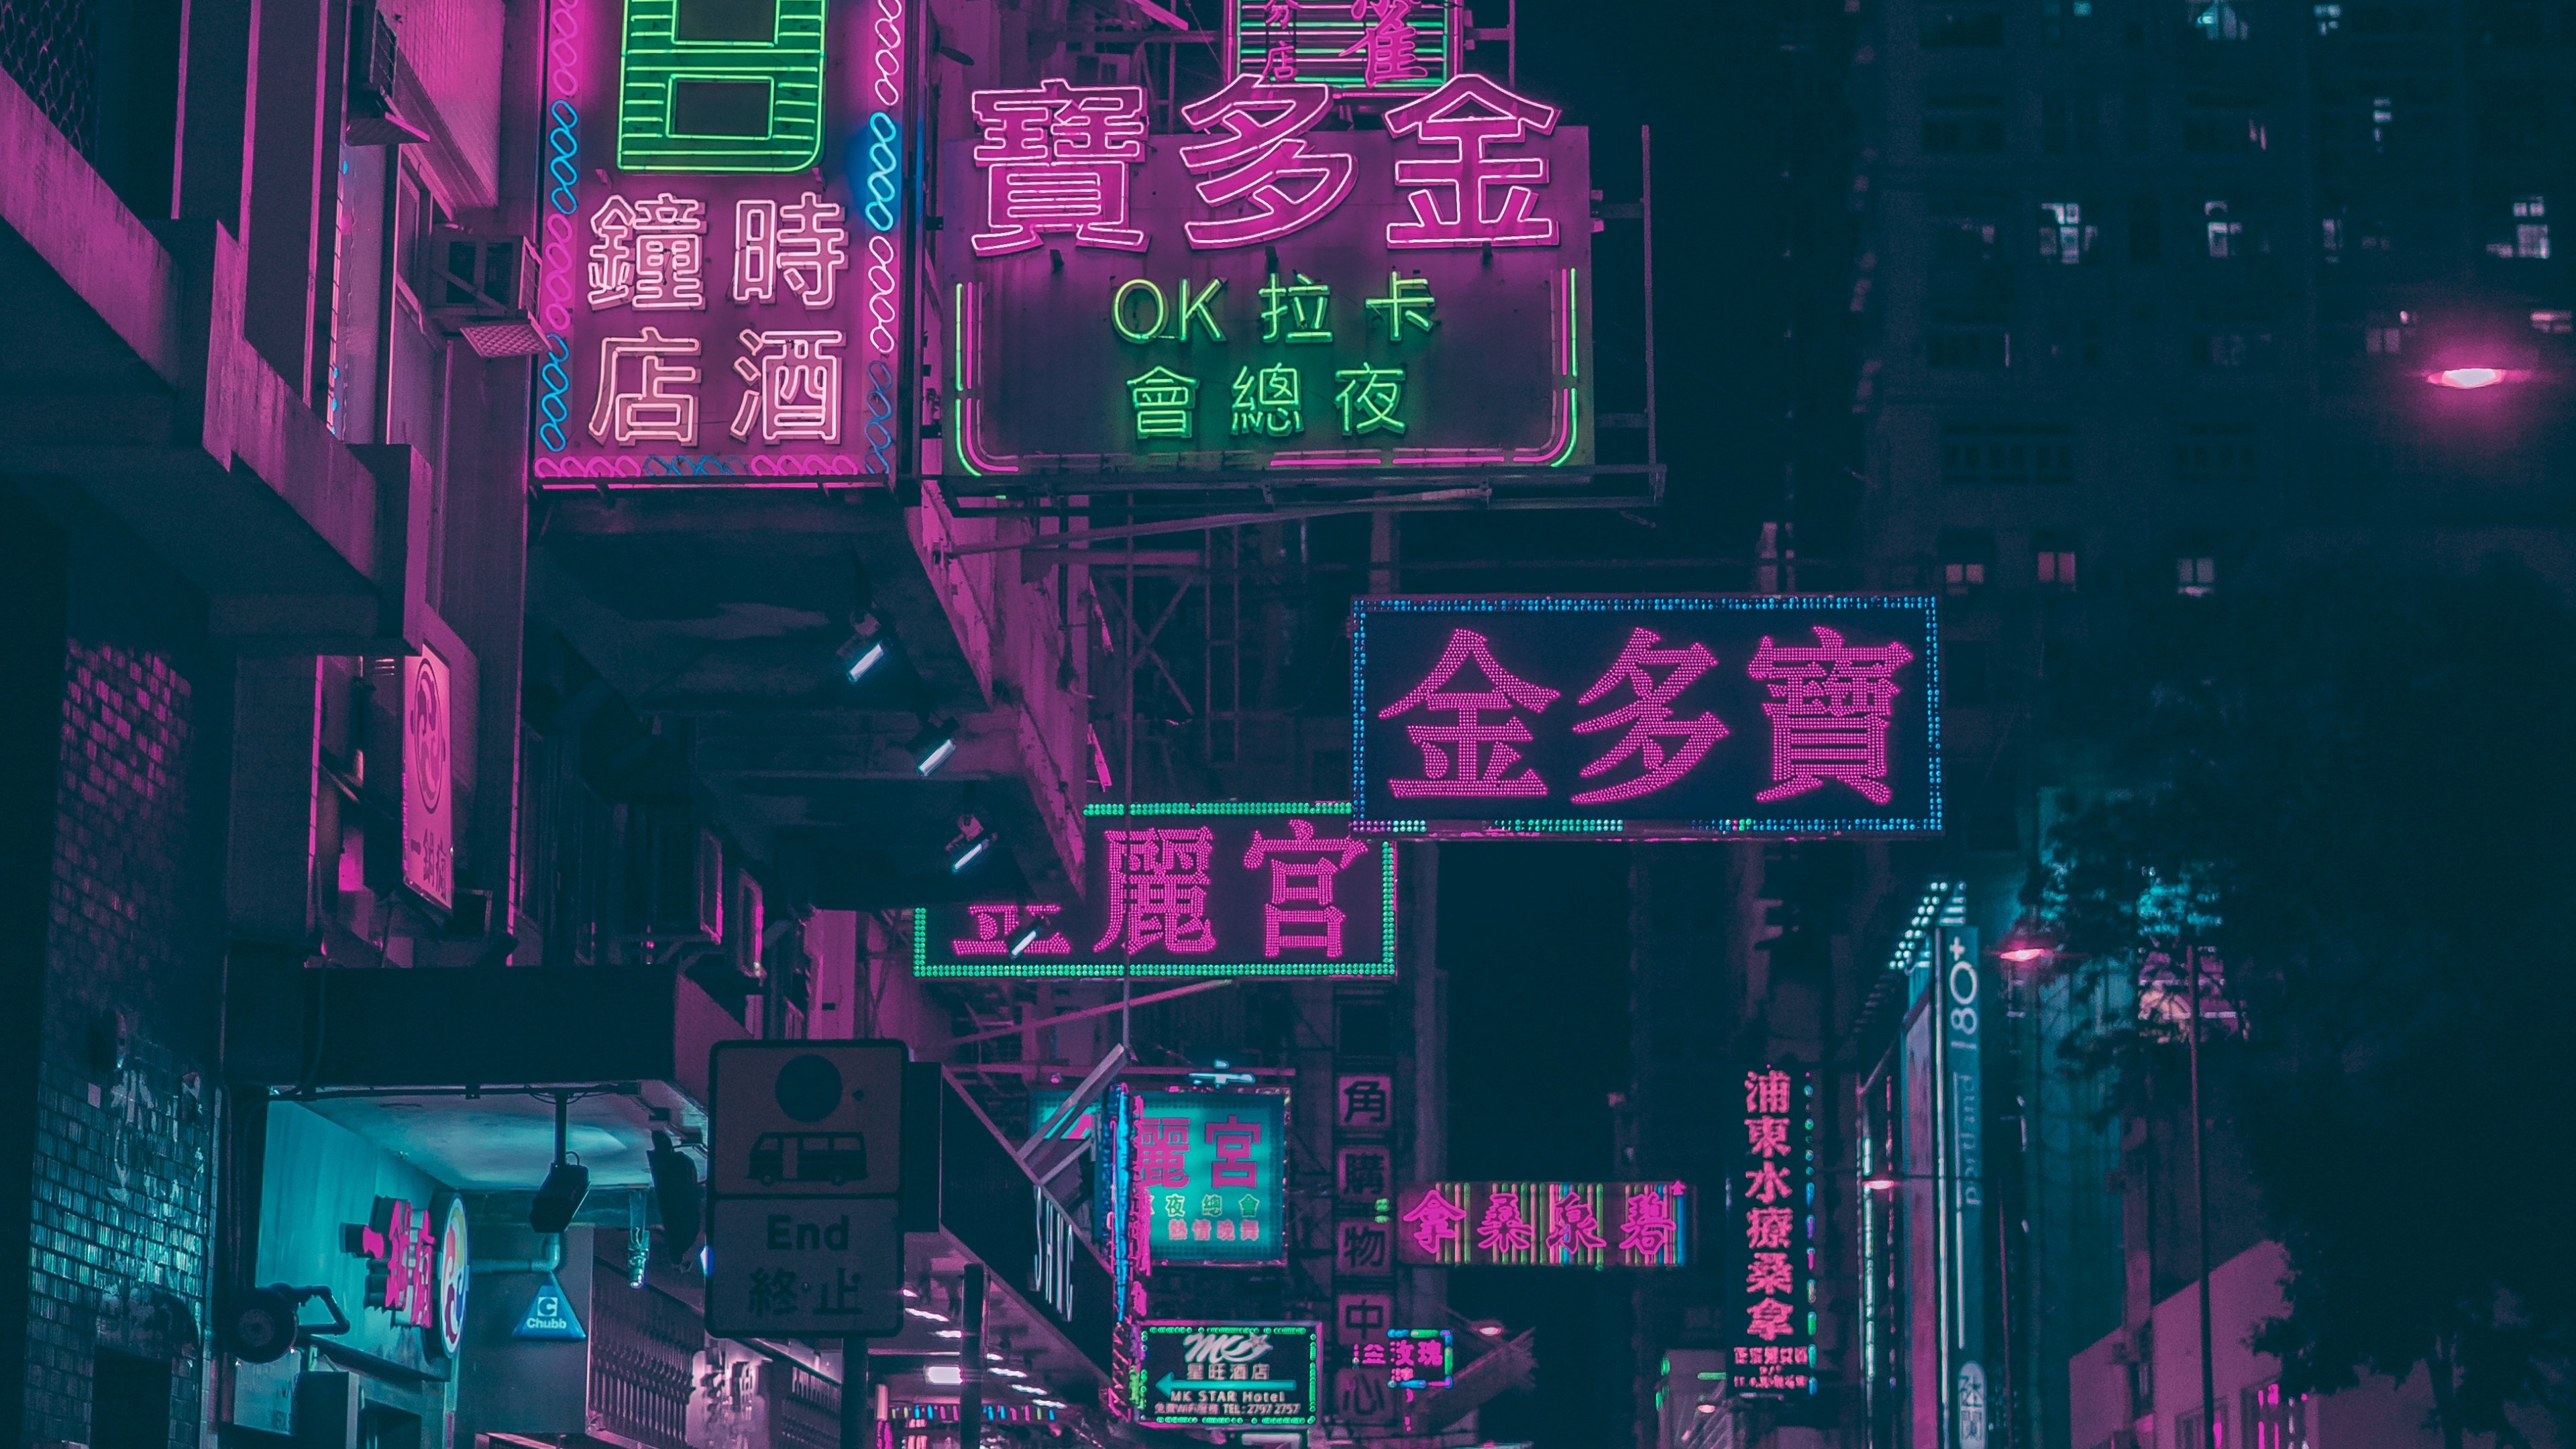 Neon 4K wallpaper for your desktop or mobile screen free and easy to download